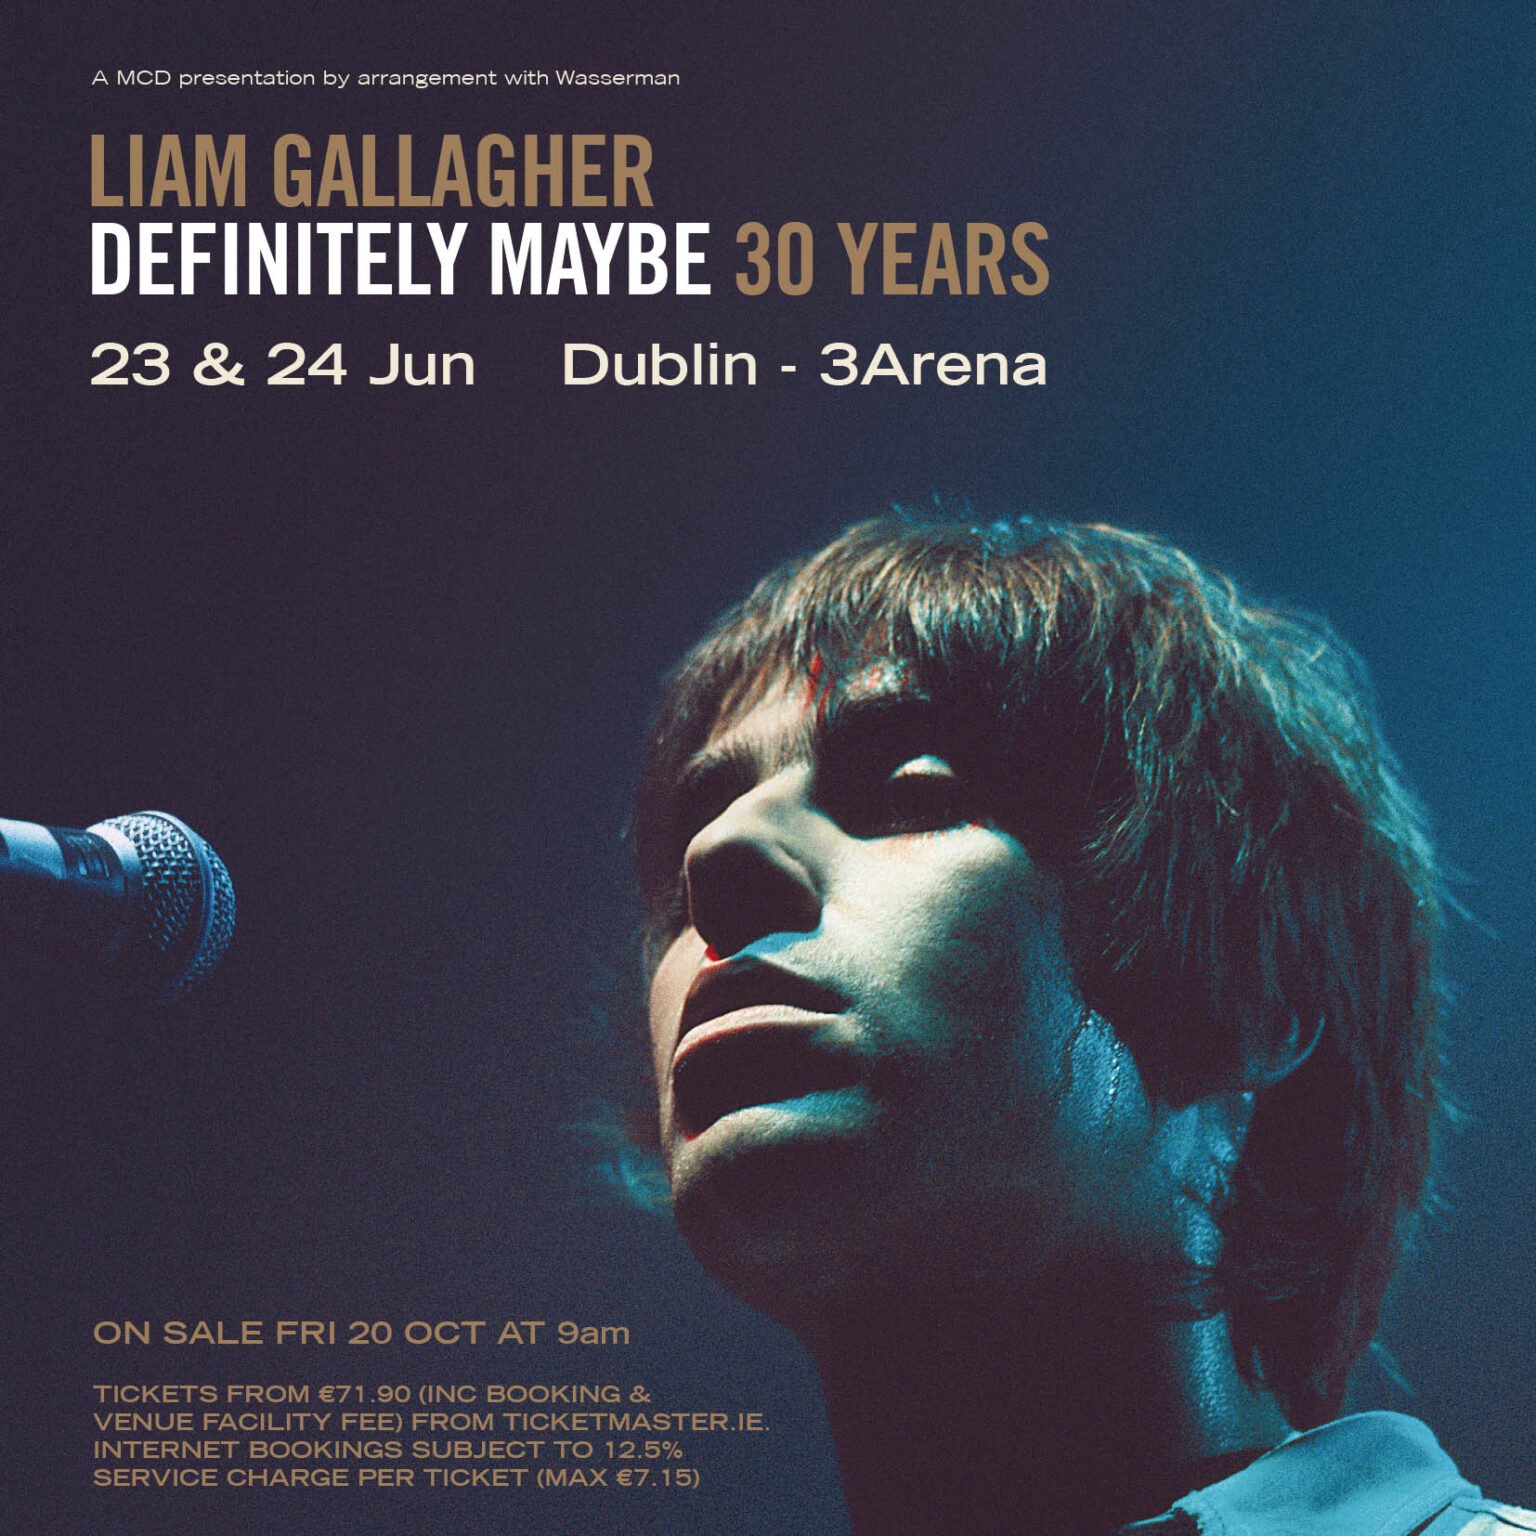 LIAM GALLAGHER ANNOUNCES THE ‘DEFINITELY MAYBE 30 YEARS’ ANNIVERSARY